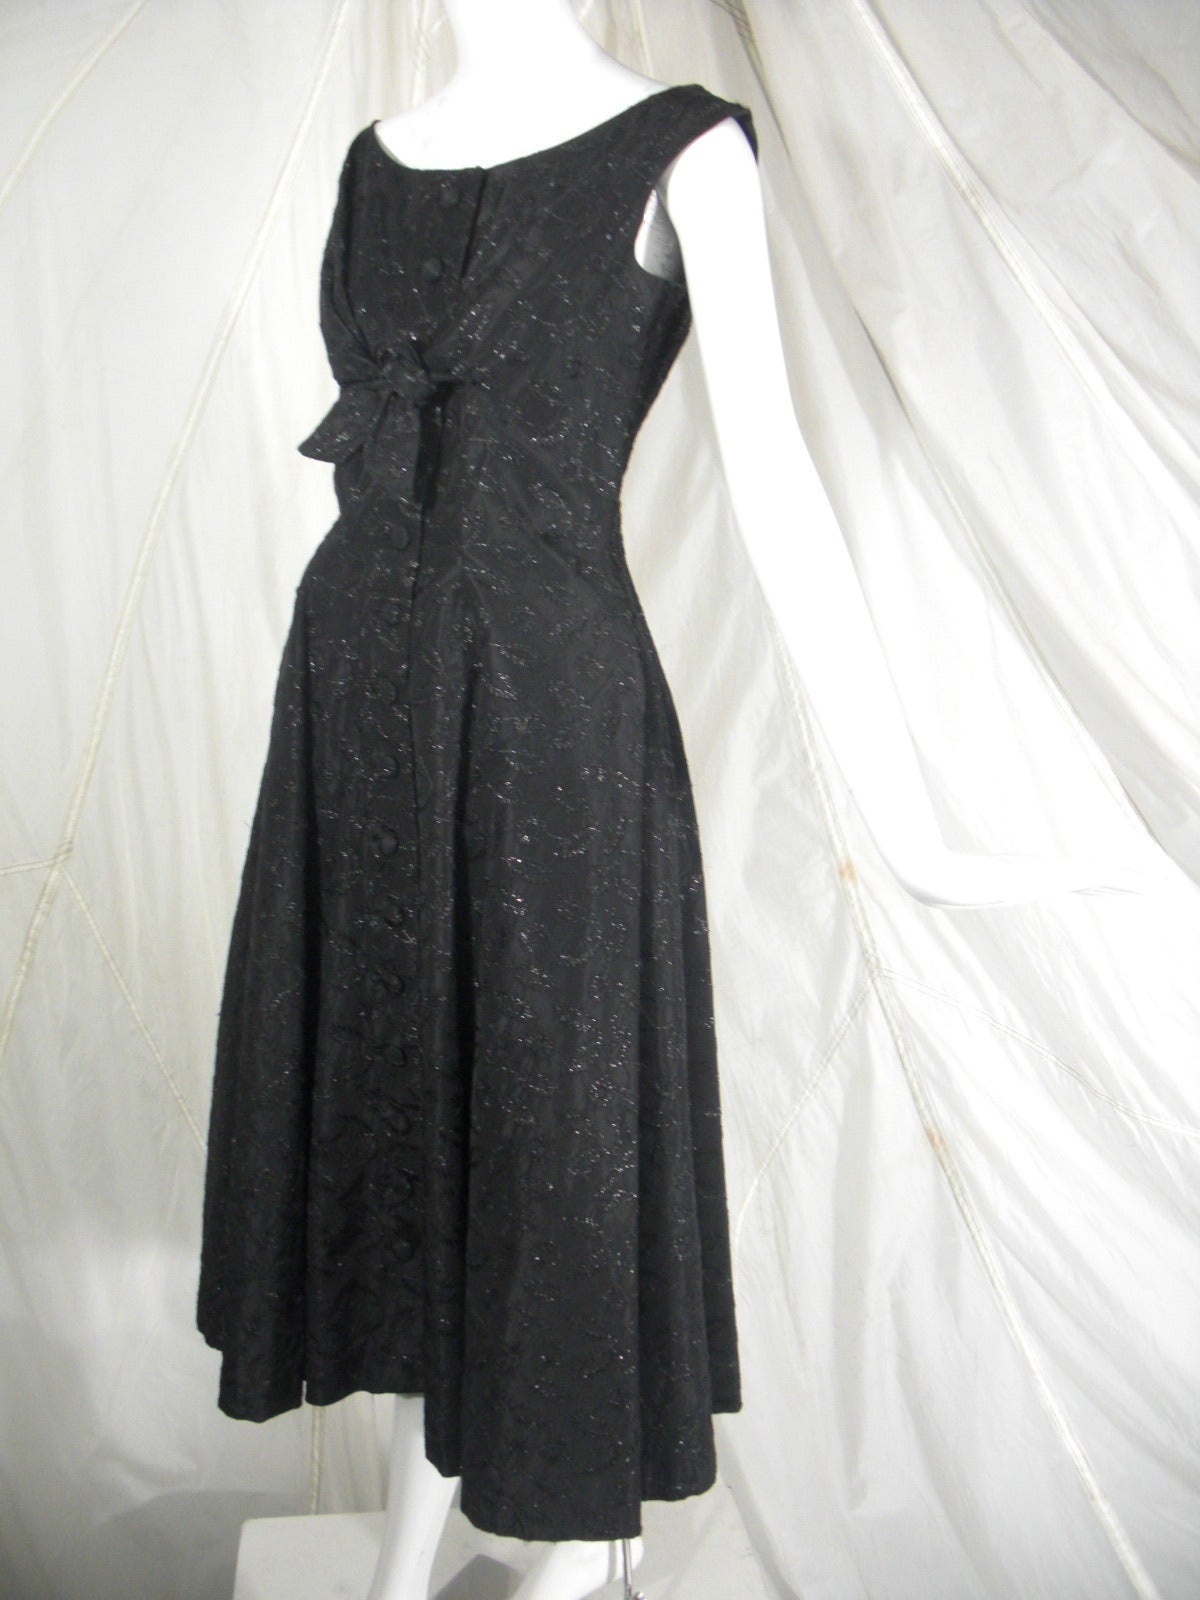 Women's 1950s Suzy Perette Black Button Front Dress with Embroidered Flowers